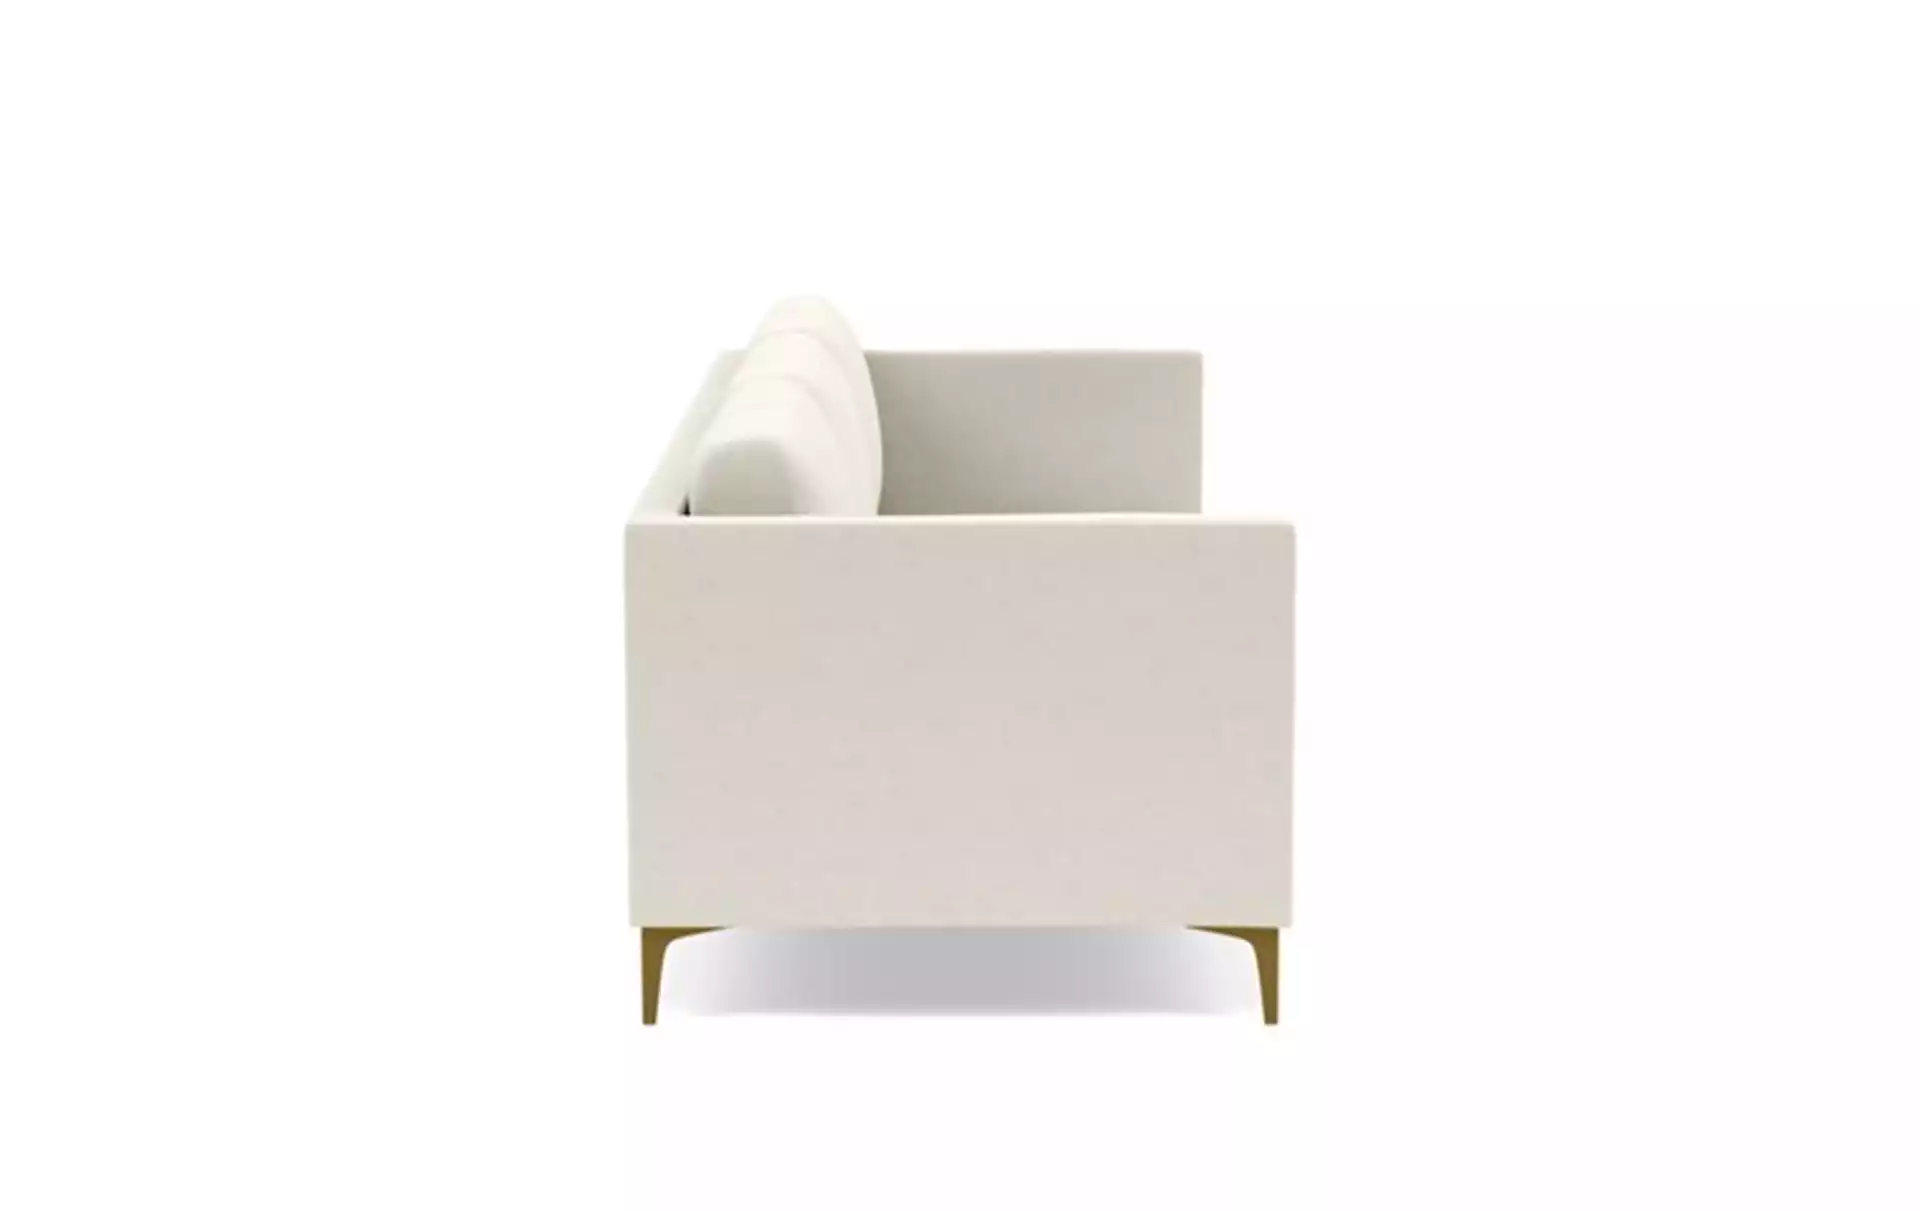 Oliver Sofa with White Chalk Fabric, standard down blend cushions, and Brass Plated legs